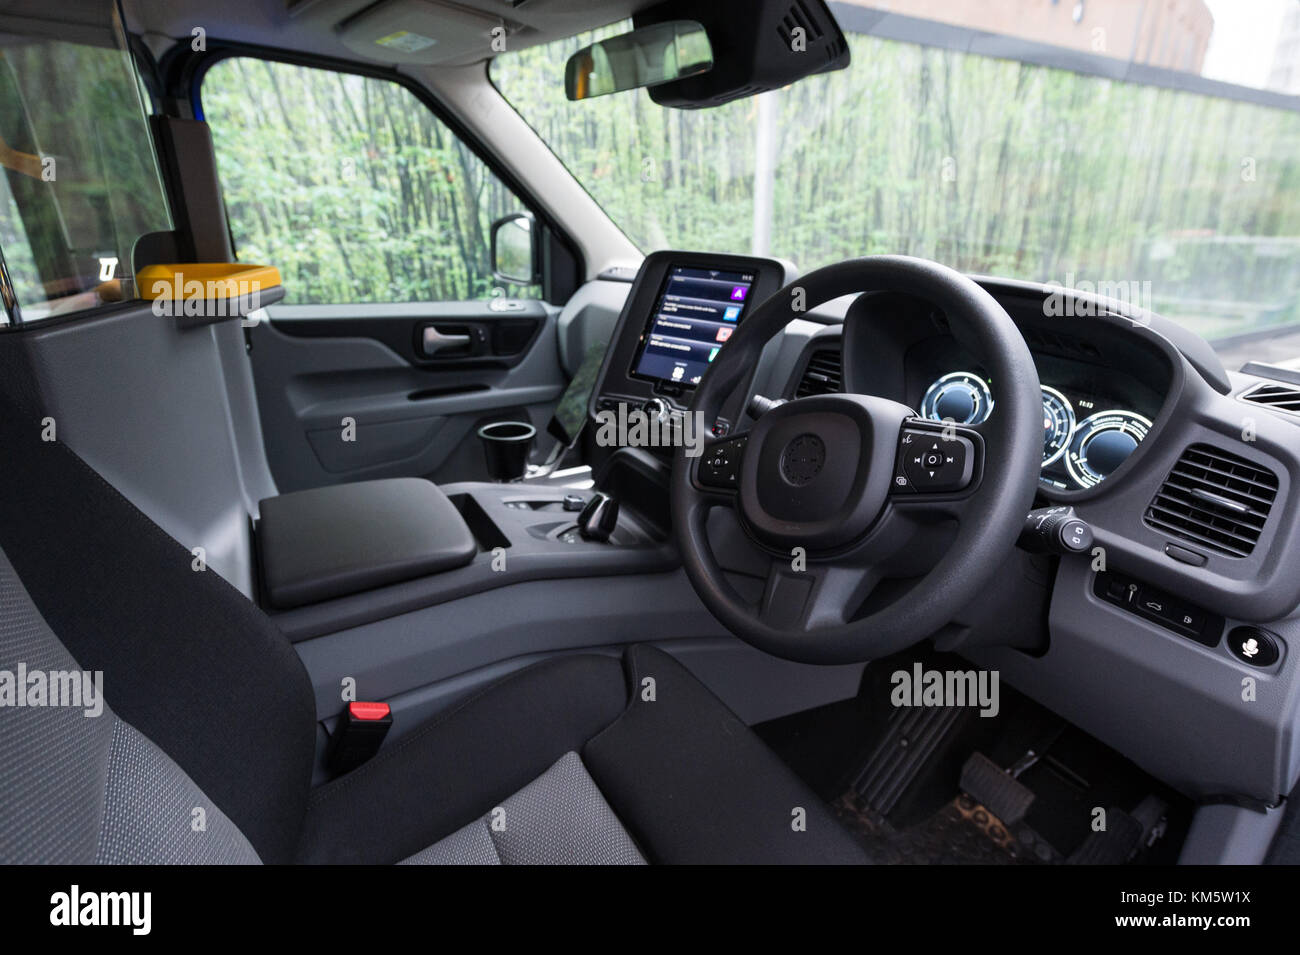 London, UK. 5th Dec, 2017. Interior of the new London Electric Vehicle  Company TX Electric Taxi in front of Battersea Power Station on December  05, 2017. The new environmentally friendly TX model